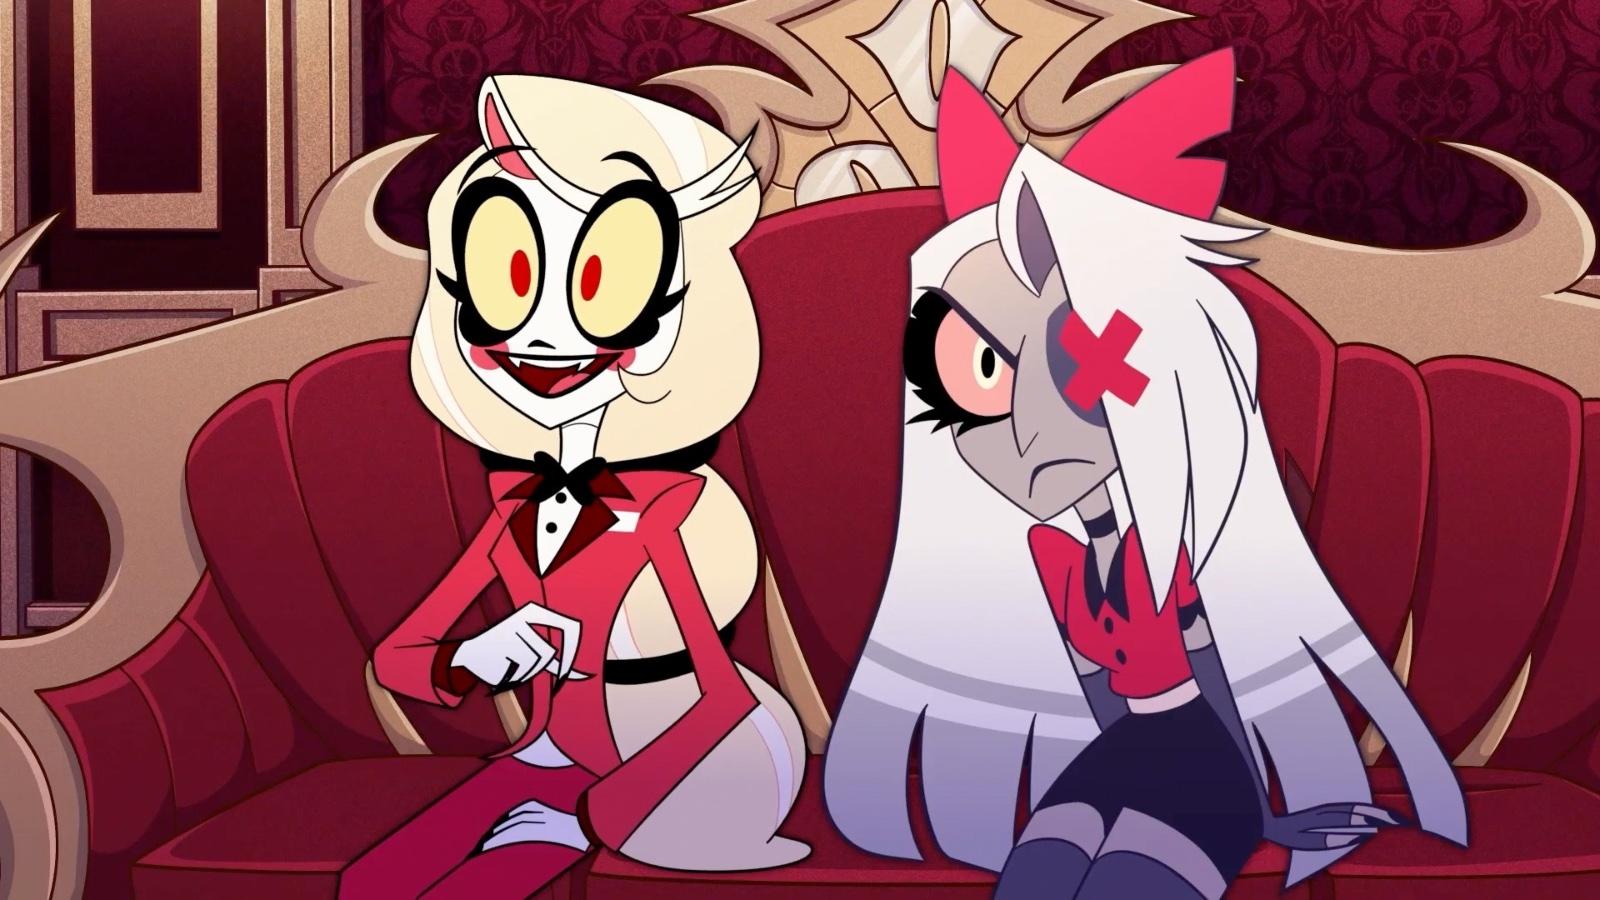 Charlie and Vaggie in Hazbin Hotel on a couch.